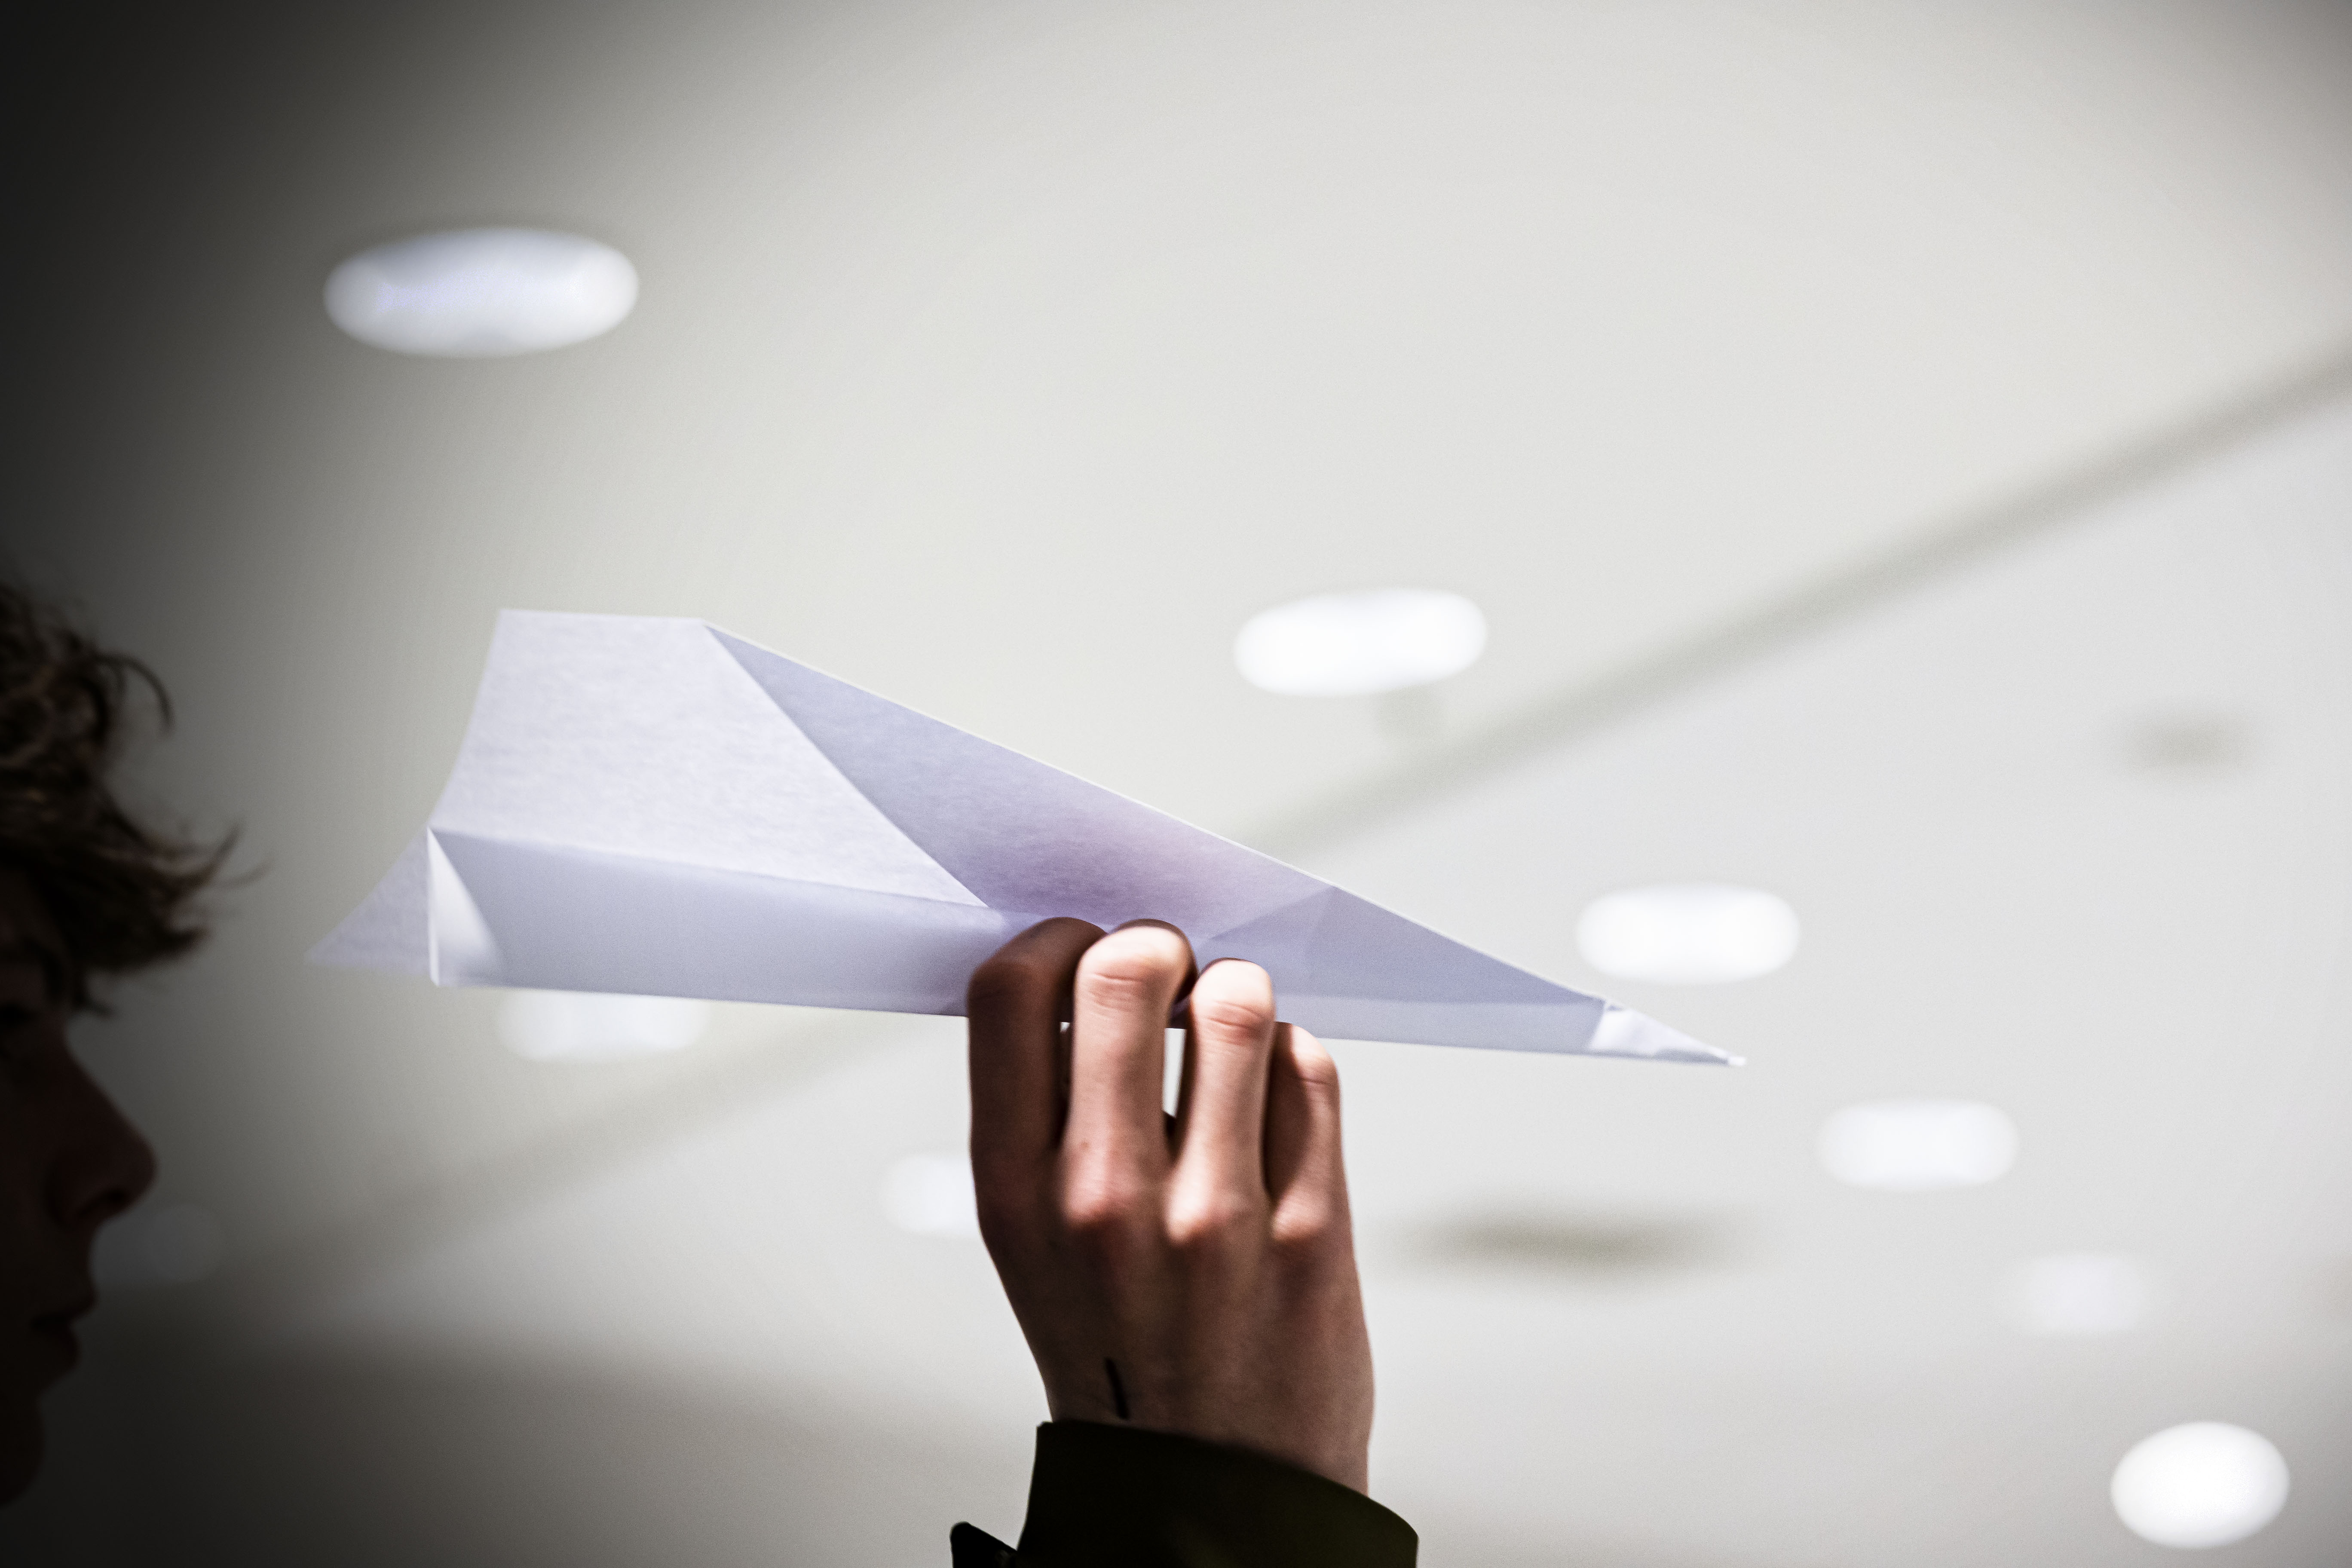 A student makes his first test flight | Image by Leoni von Ristok